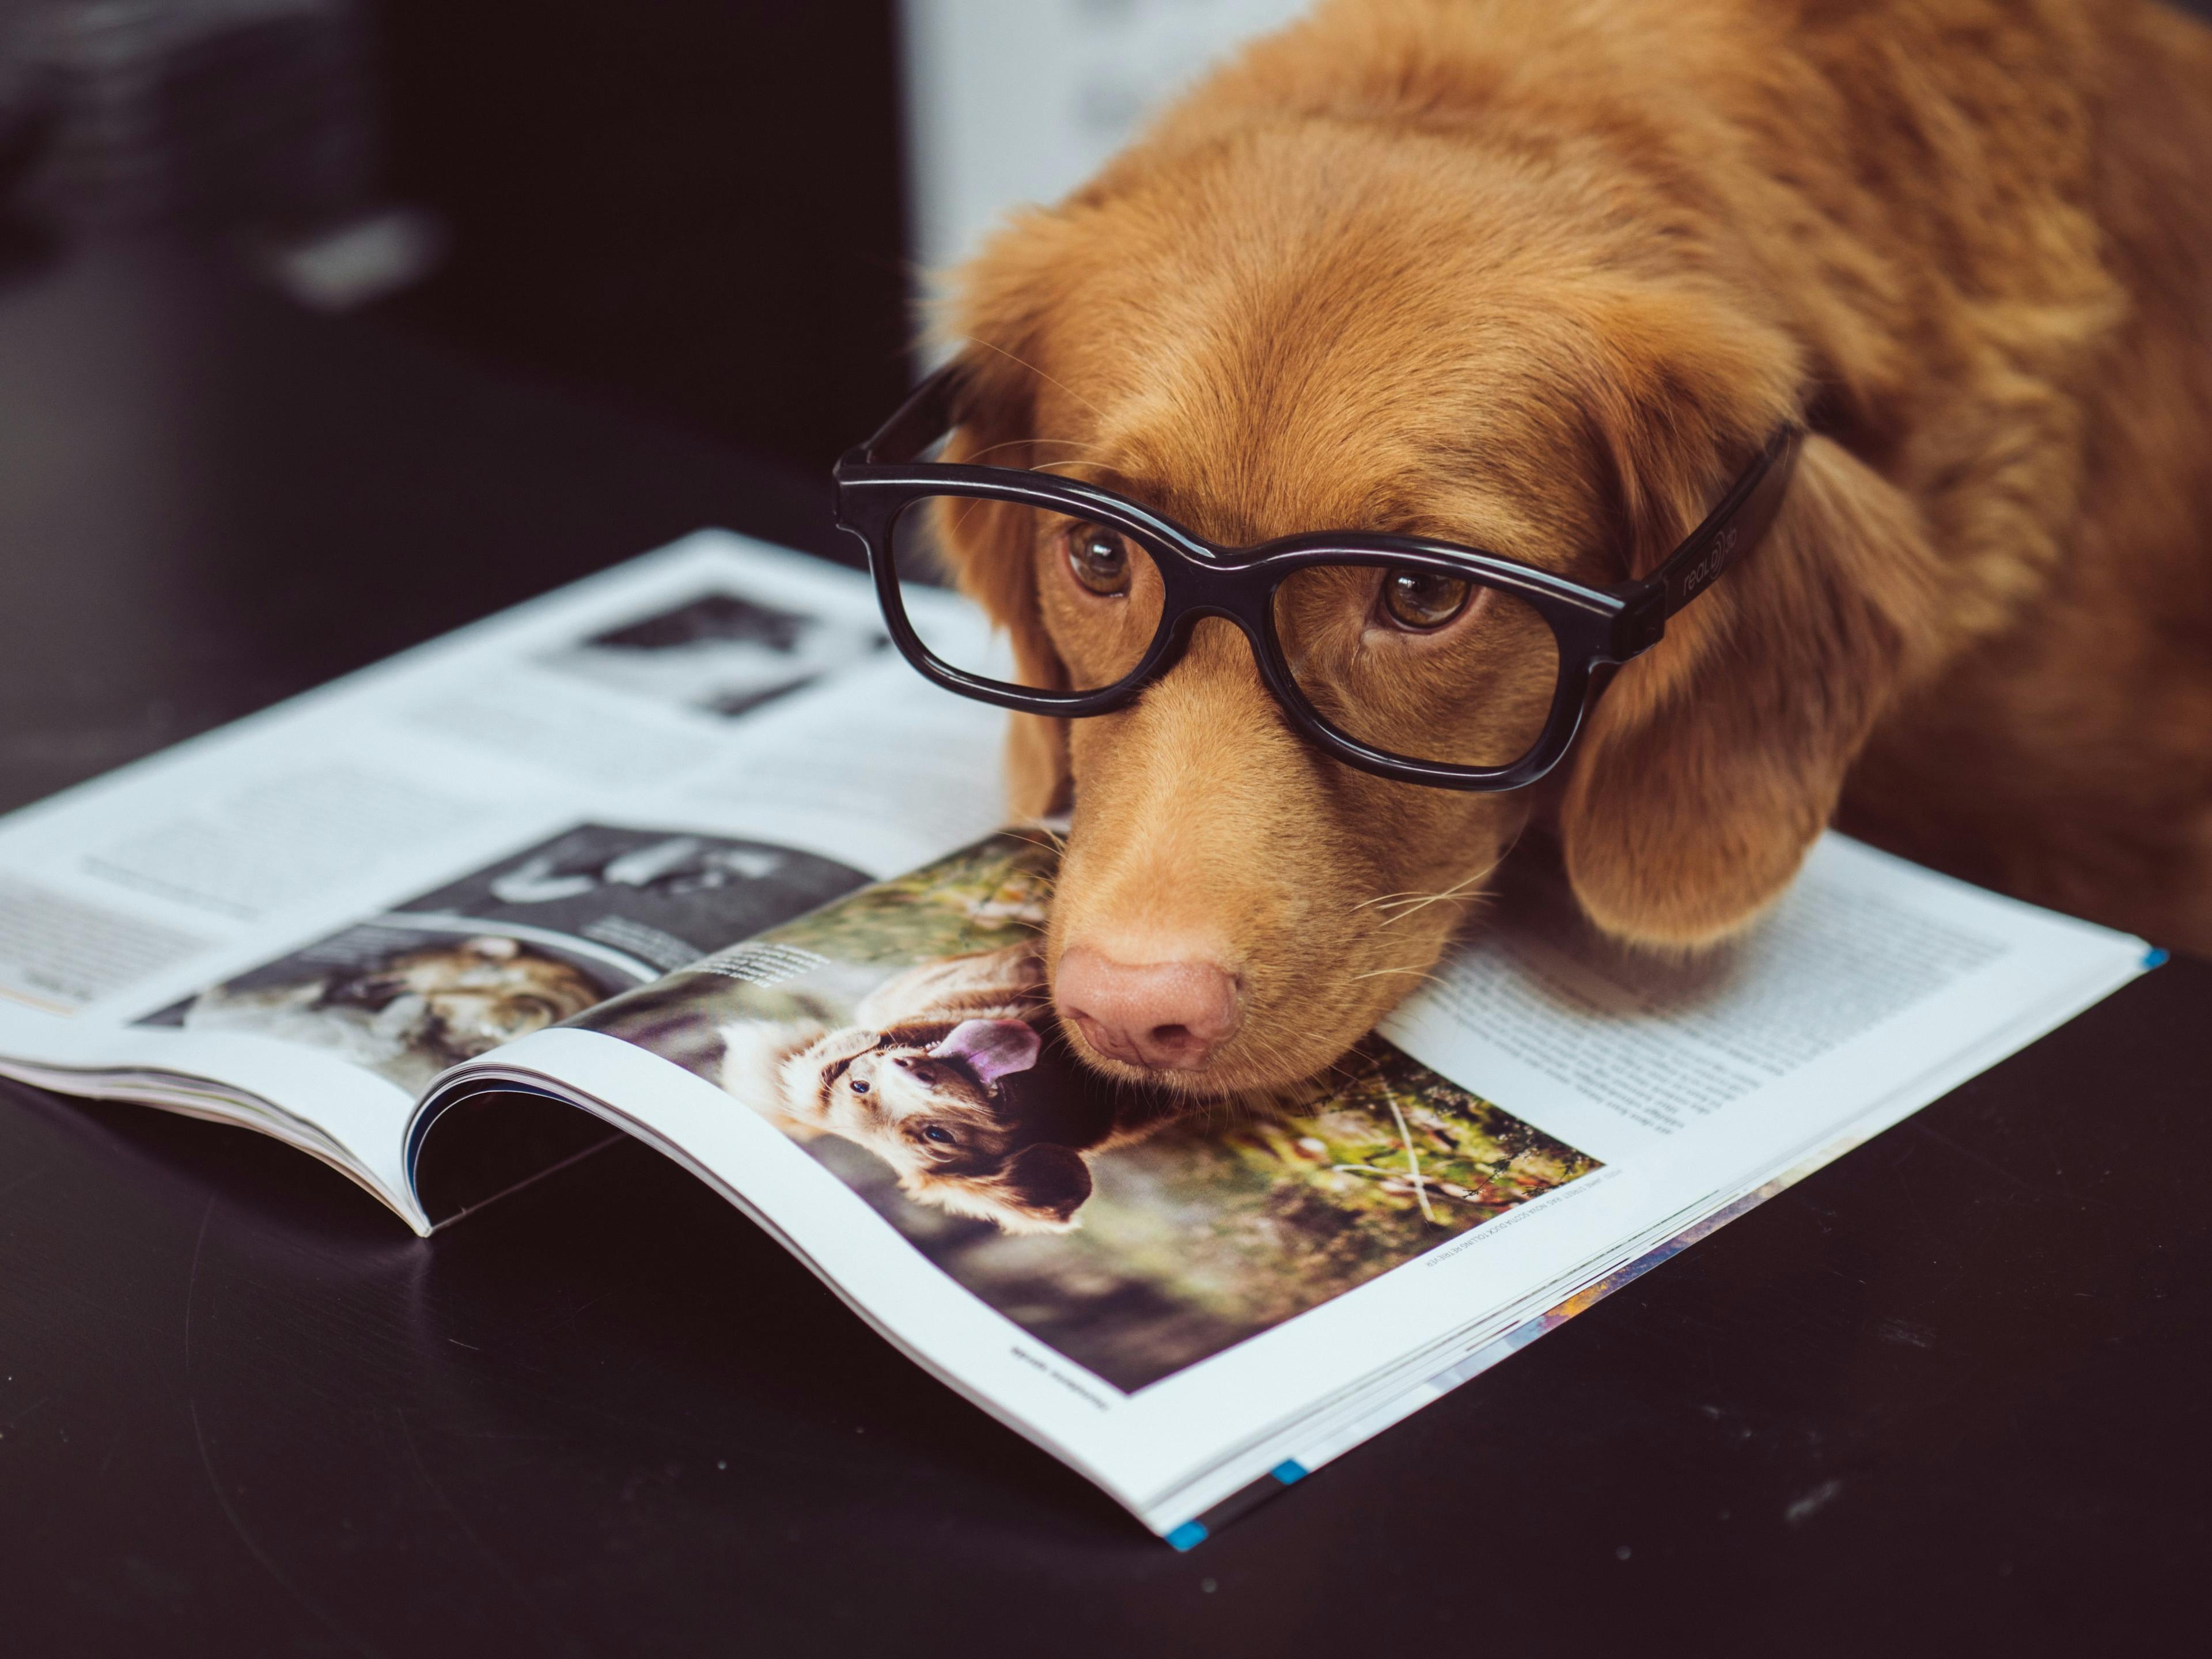 A well-informed dog reads a magazine.